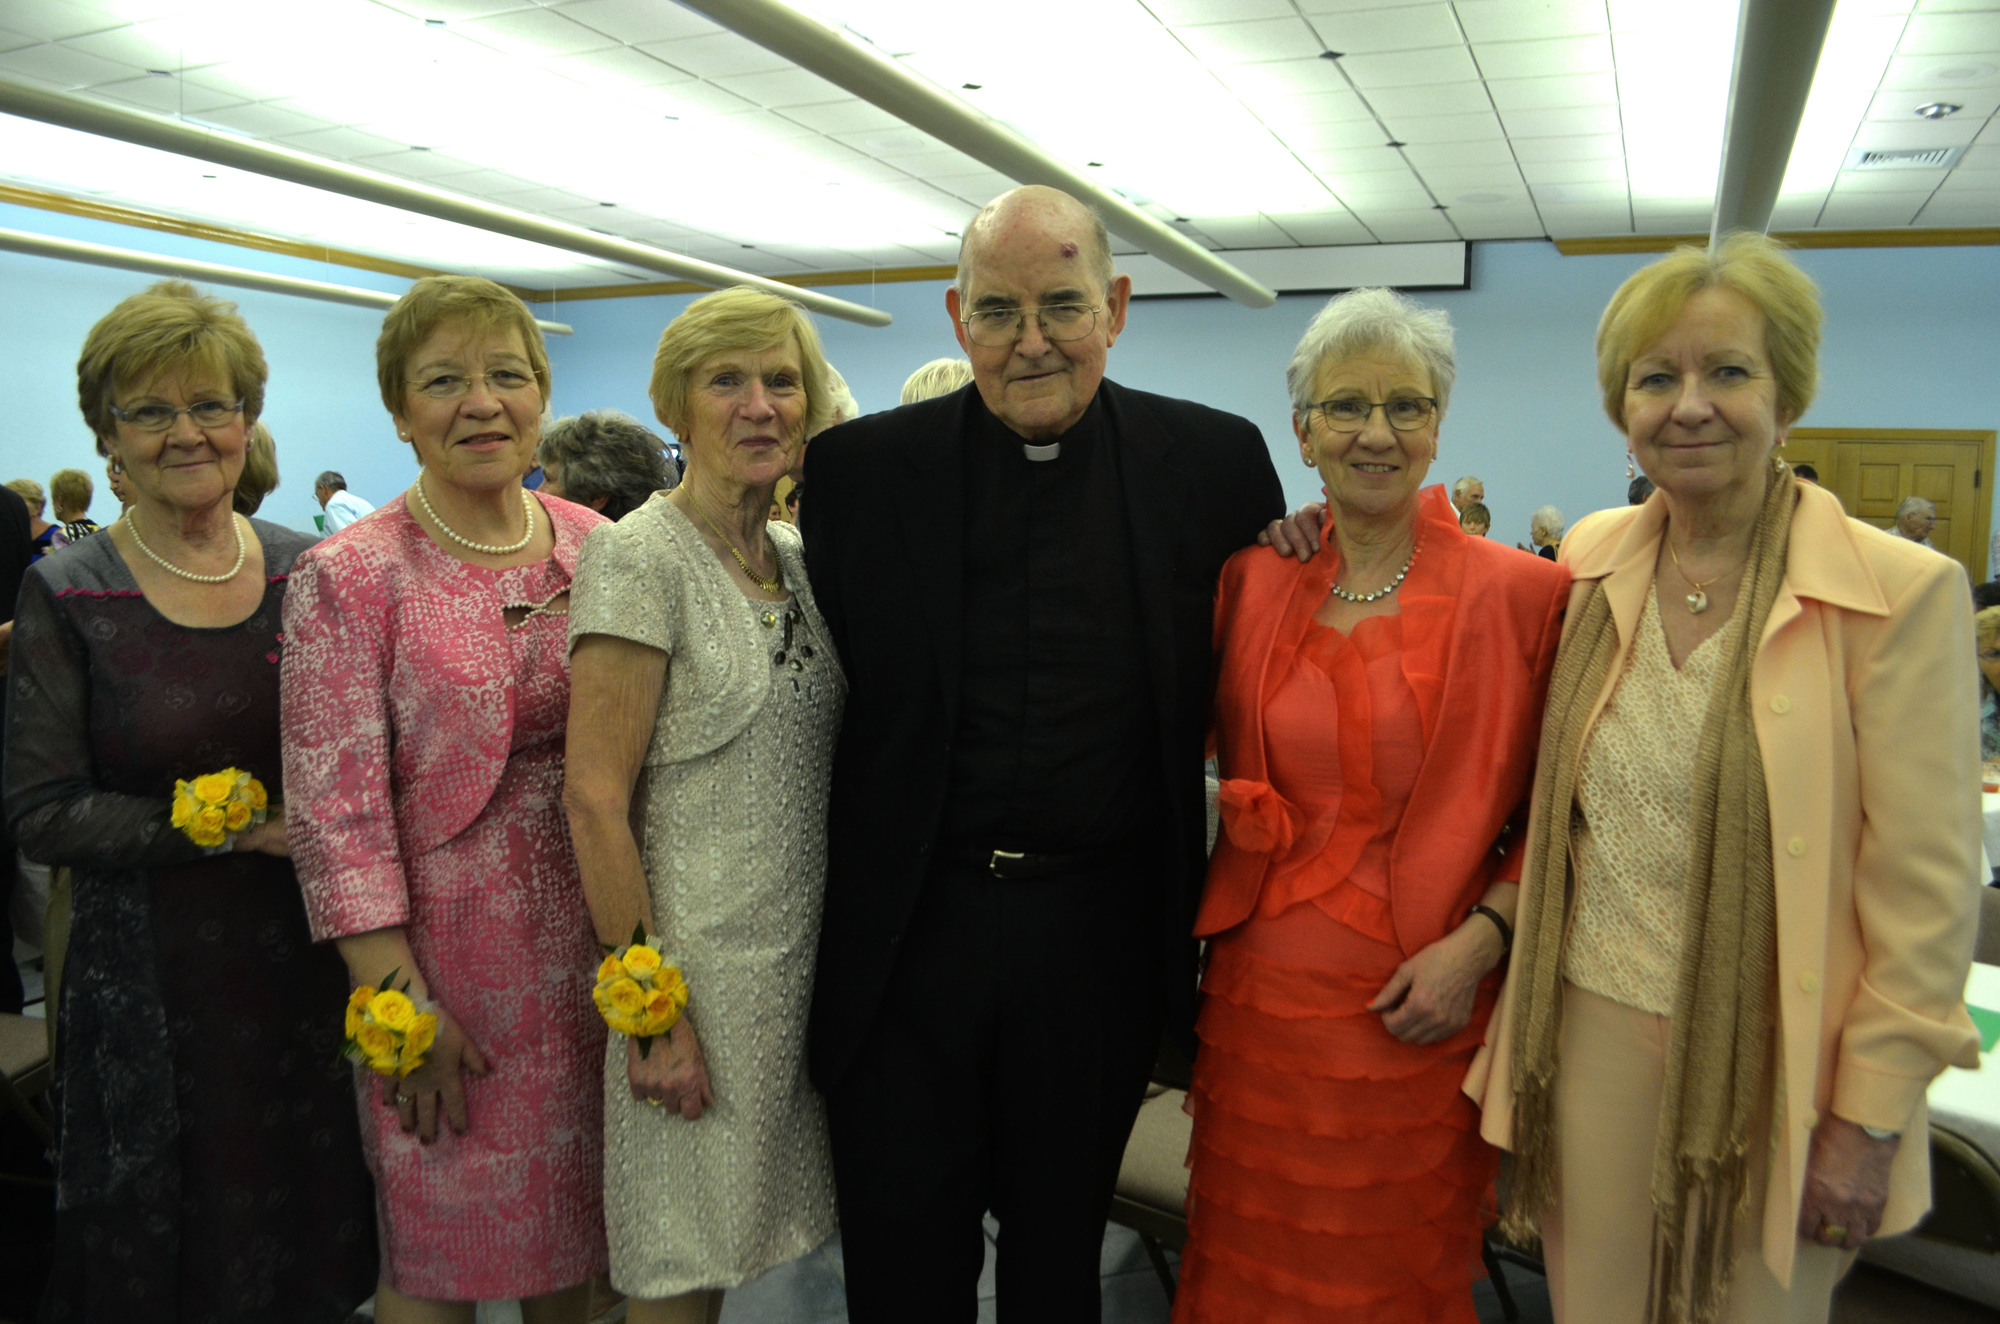 The Rev. Gerry Finegan with his five sisters Áine Connelly, Catherine O’Leary, Mary Tunney, Brigid Duffy and Josephine Finegan at his golden jubilee celebration on May 7.